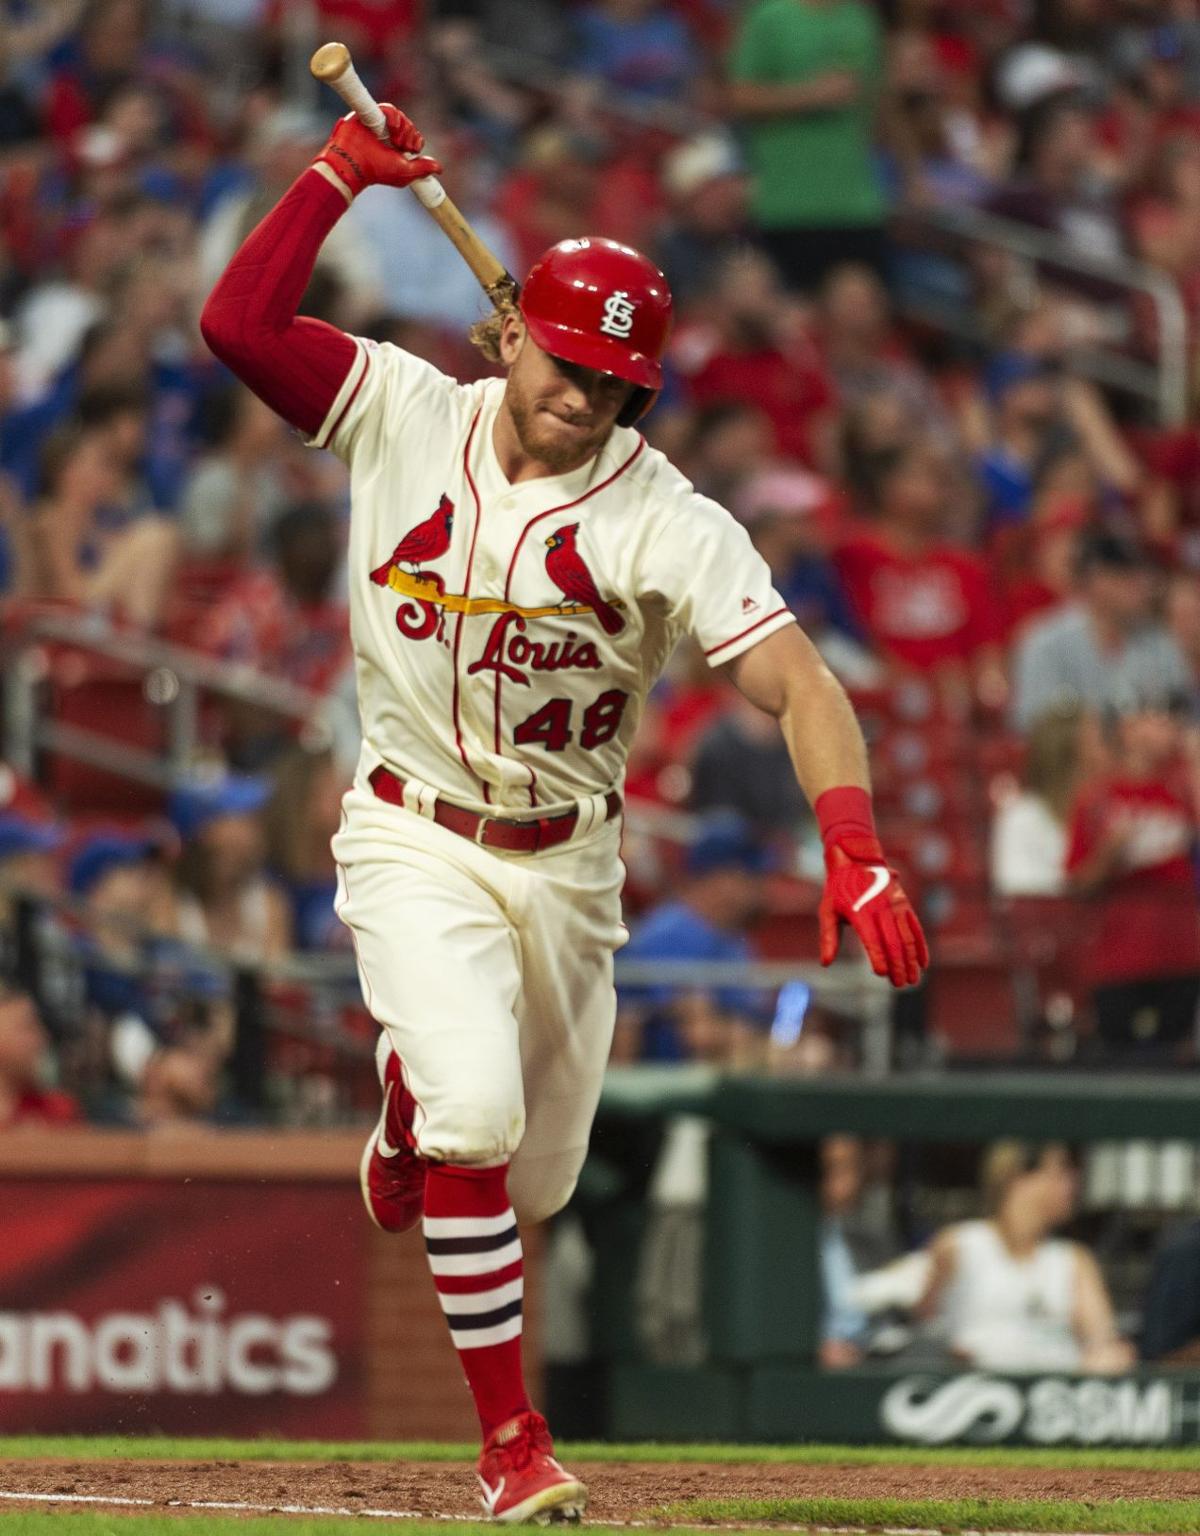 Cards, Cubs have long delay at Busch | St. Louis Cardinals | www.ermes-unice.fr